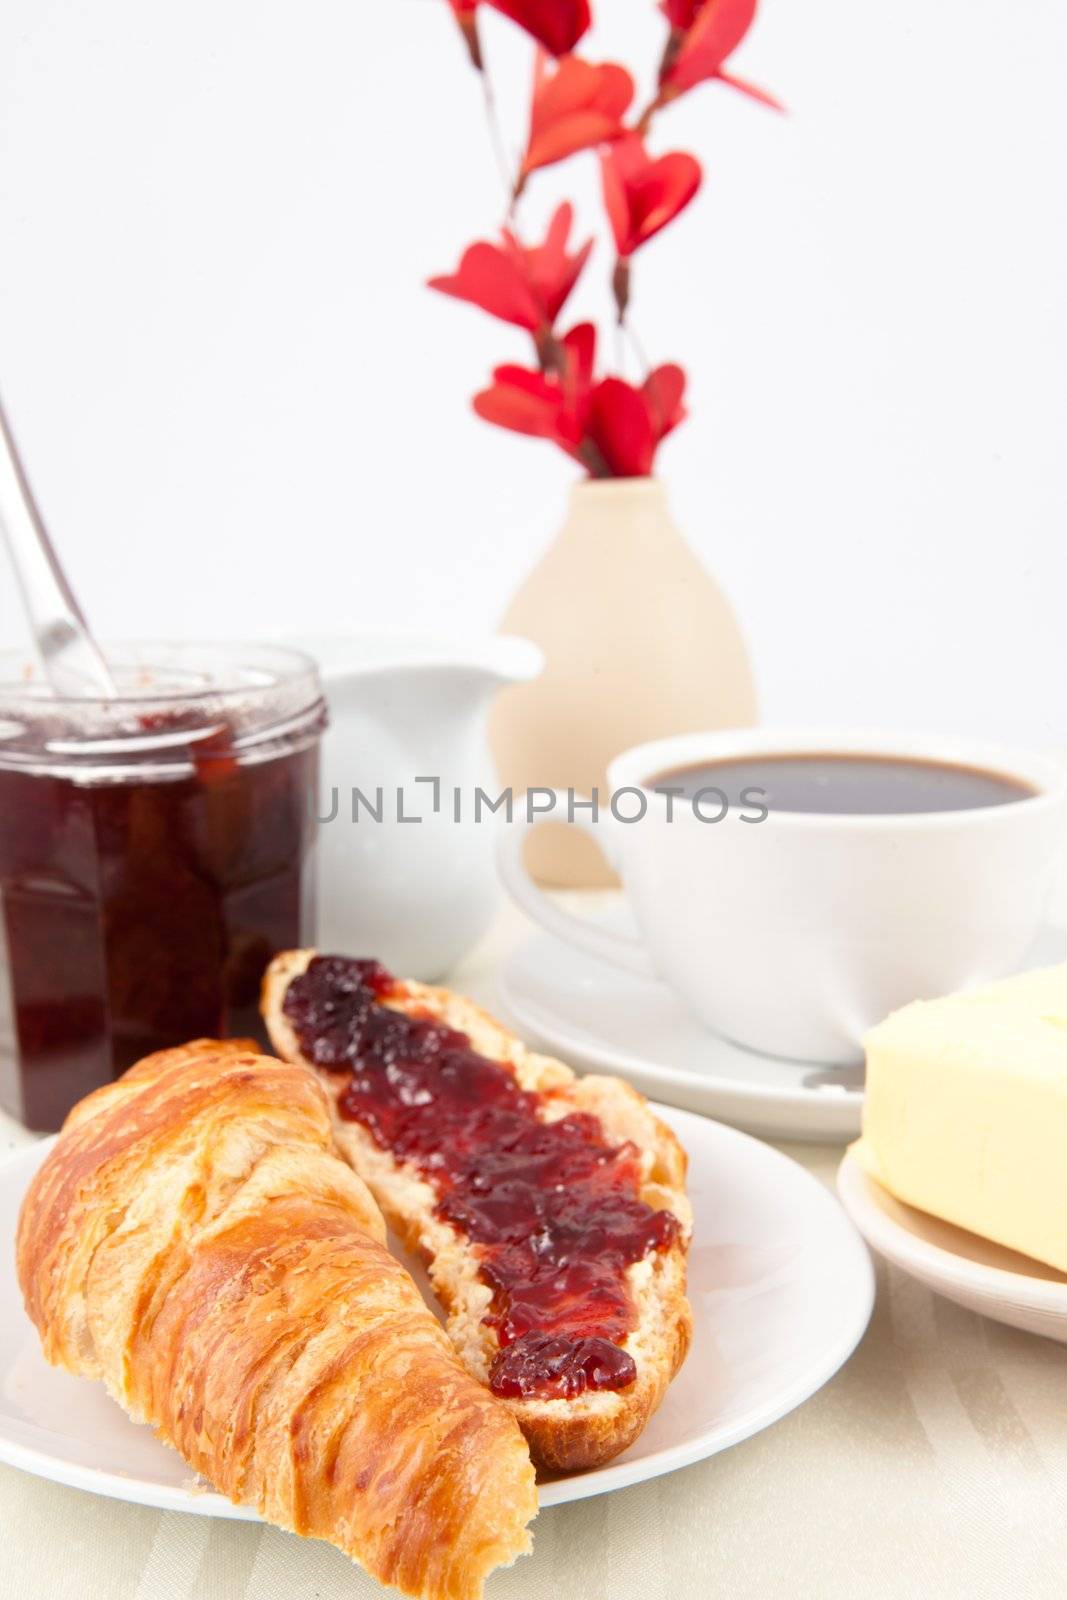 Table presentation with croissant spread with jam by Wavebreakmedia